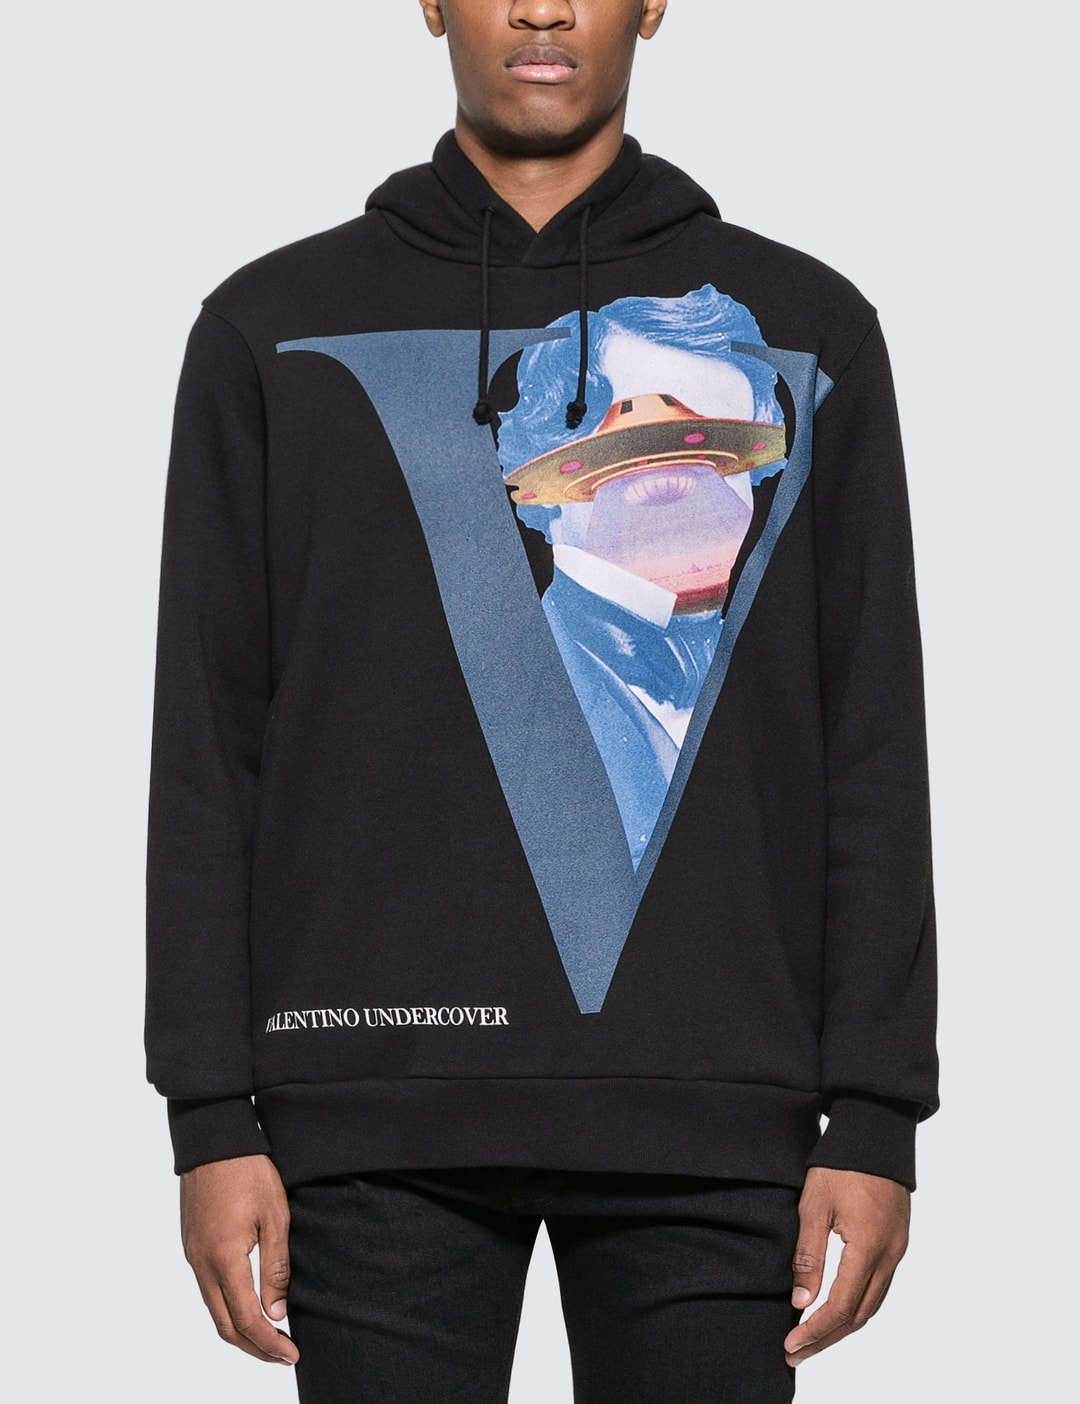 Undercover - Valentino x Undercover V Face Hoodie | HBX - Globally ...